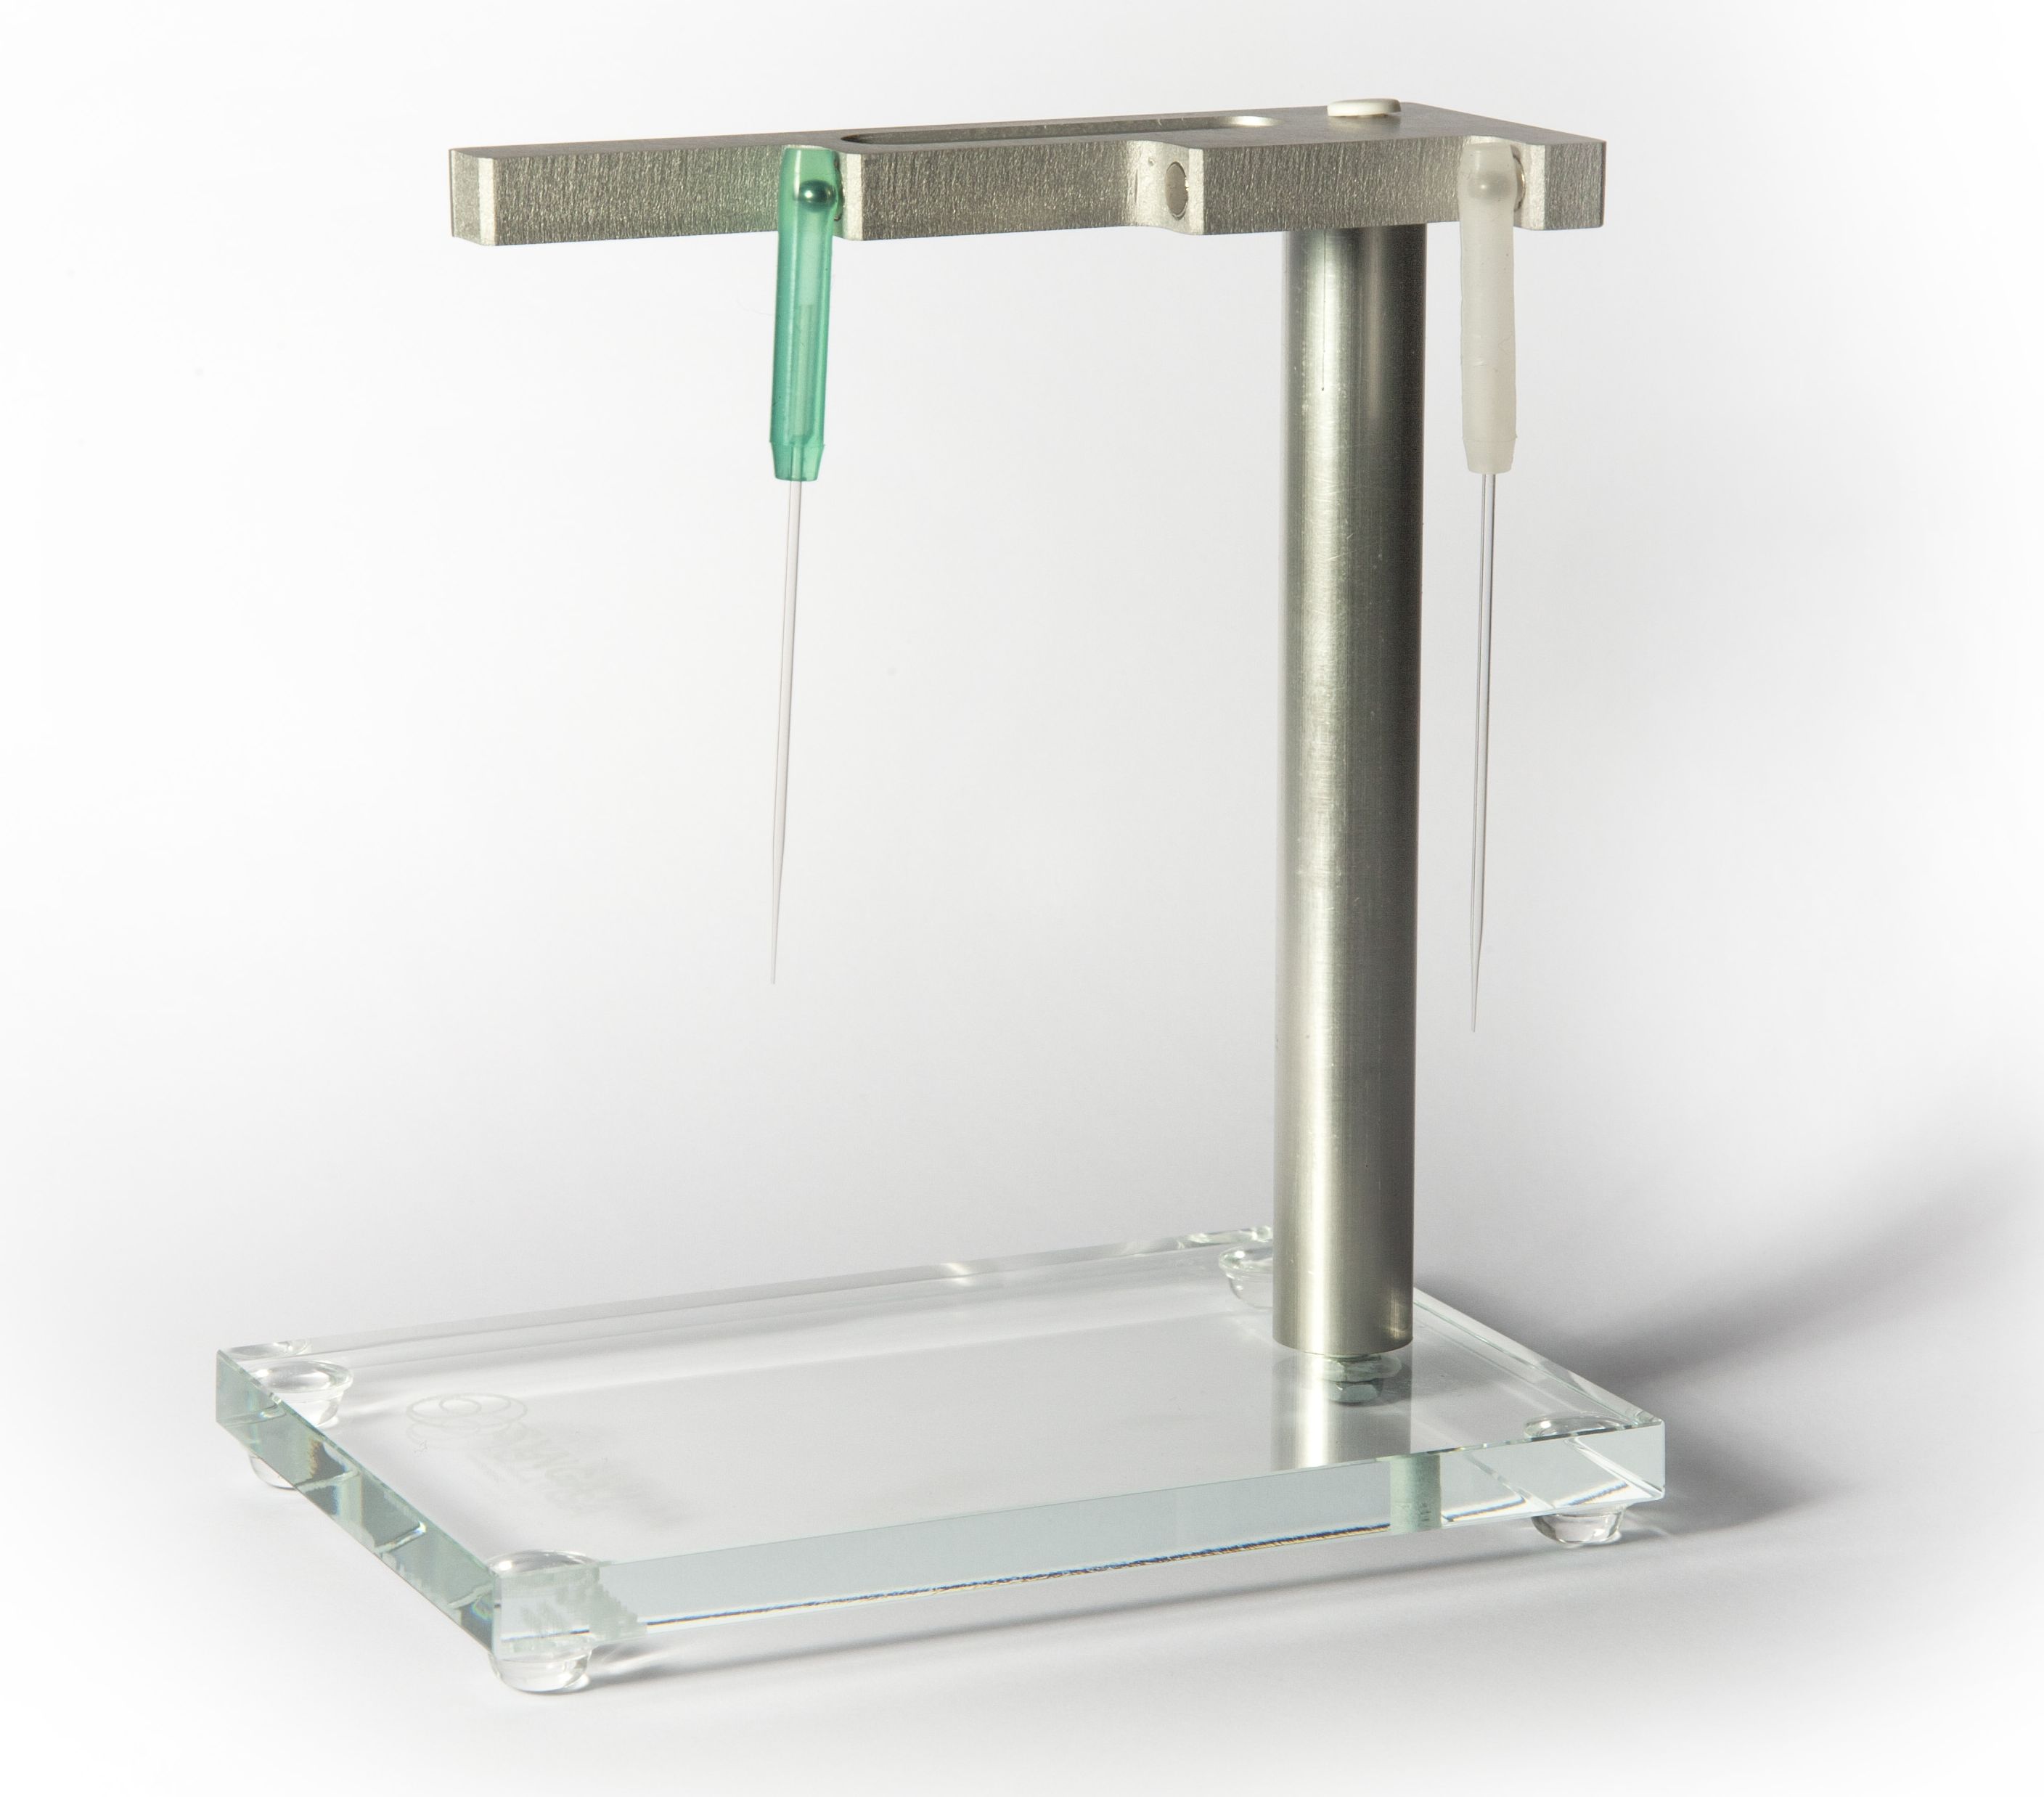 SA Base M dot Adhesive hang Rack for storage of up to 3 open pipettes with SAS bulbs or pen holders.